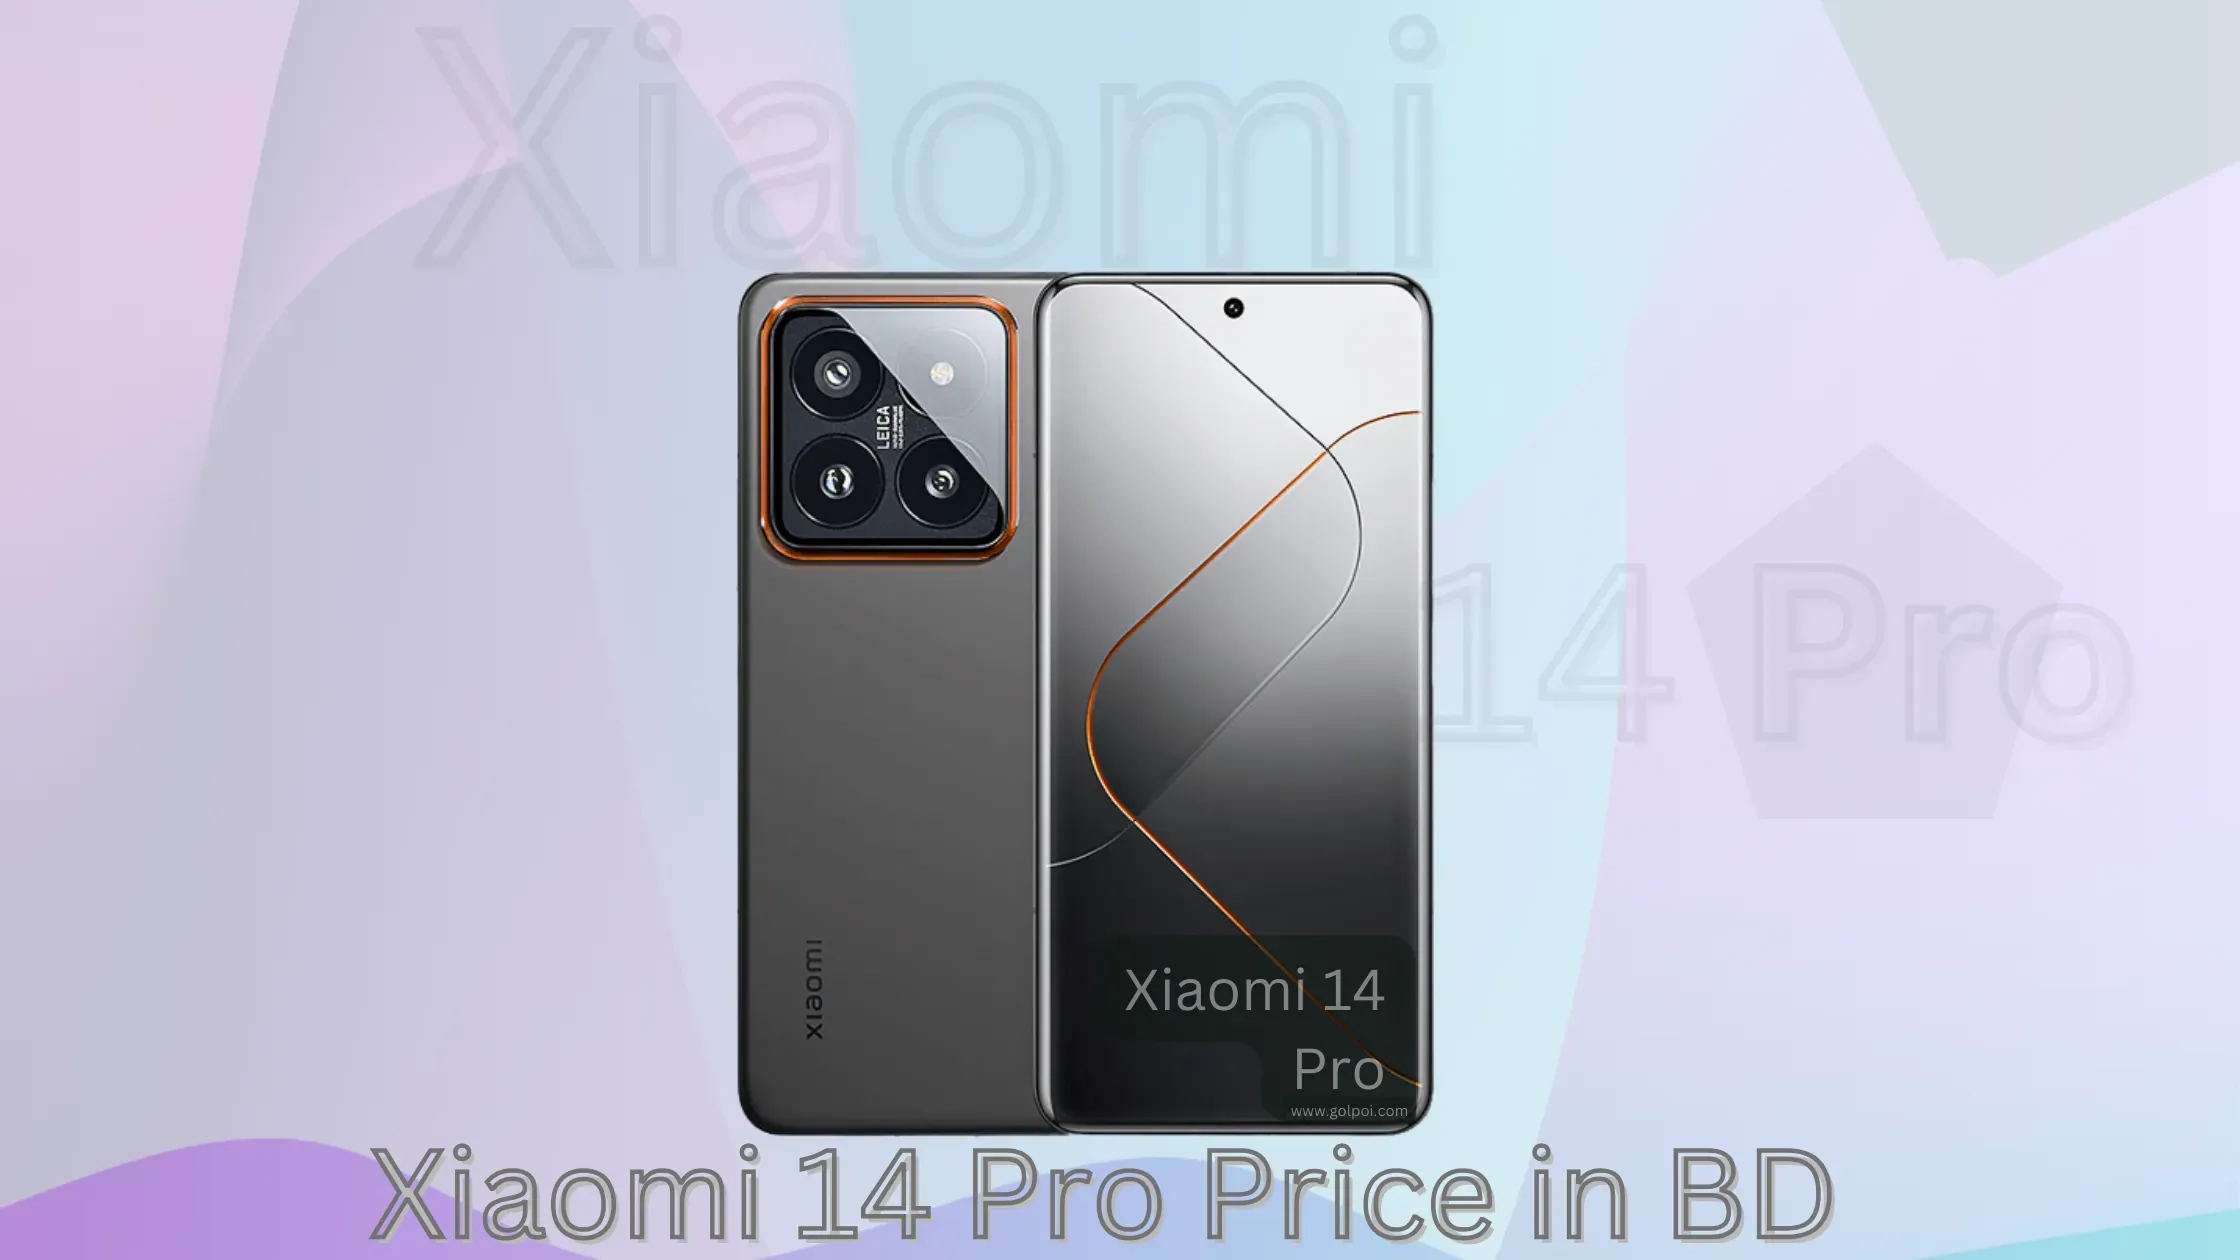 Xiaomi 14 Pro Price in BD